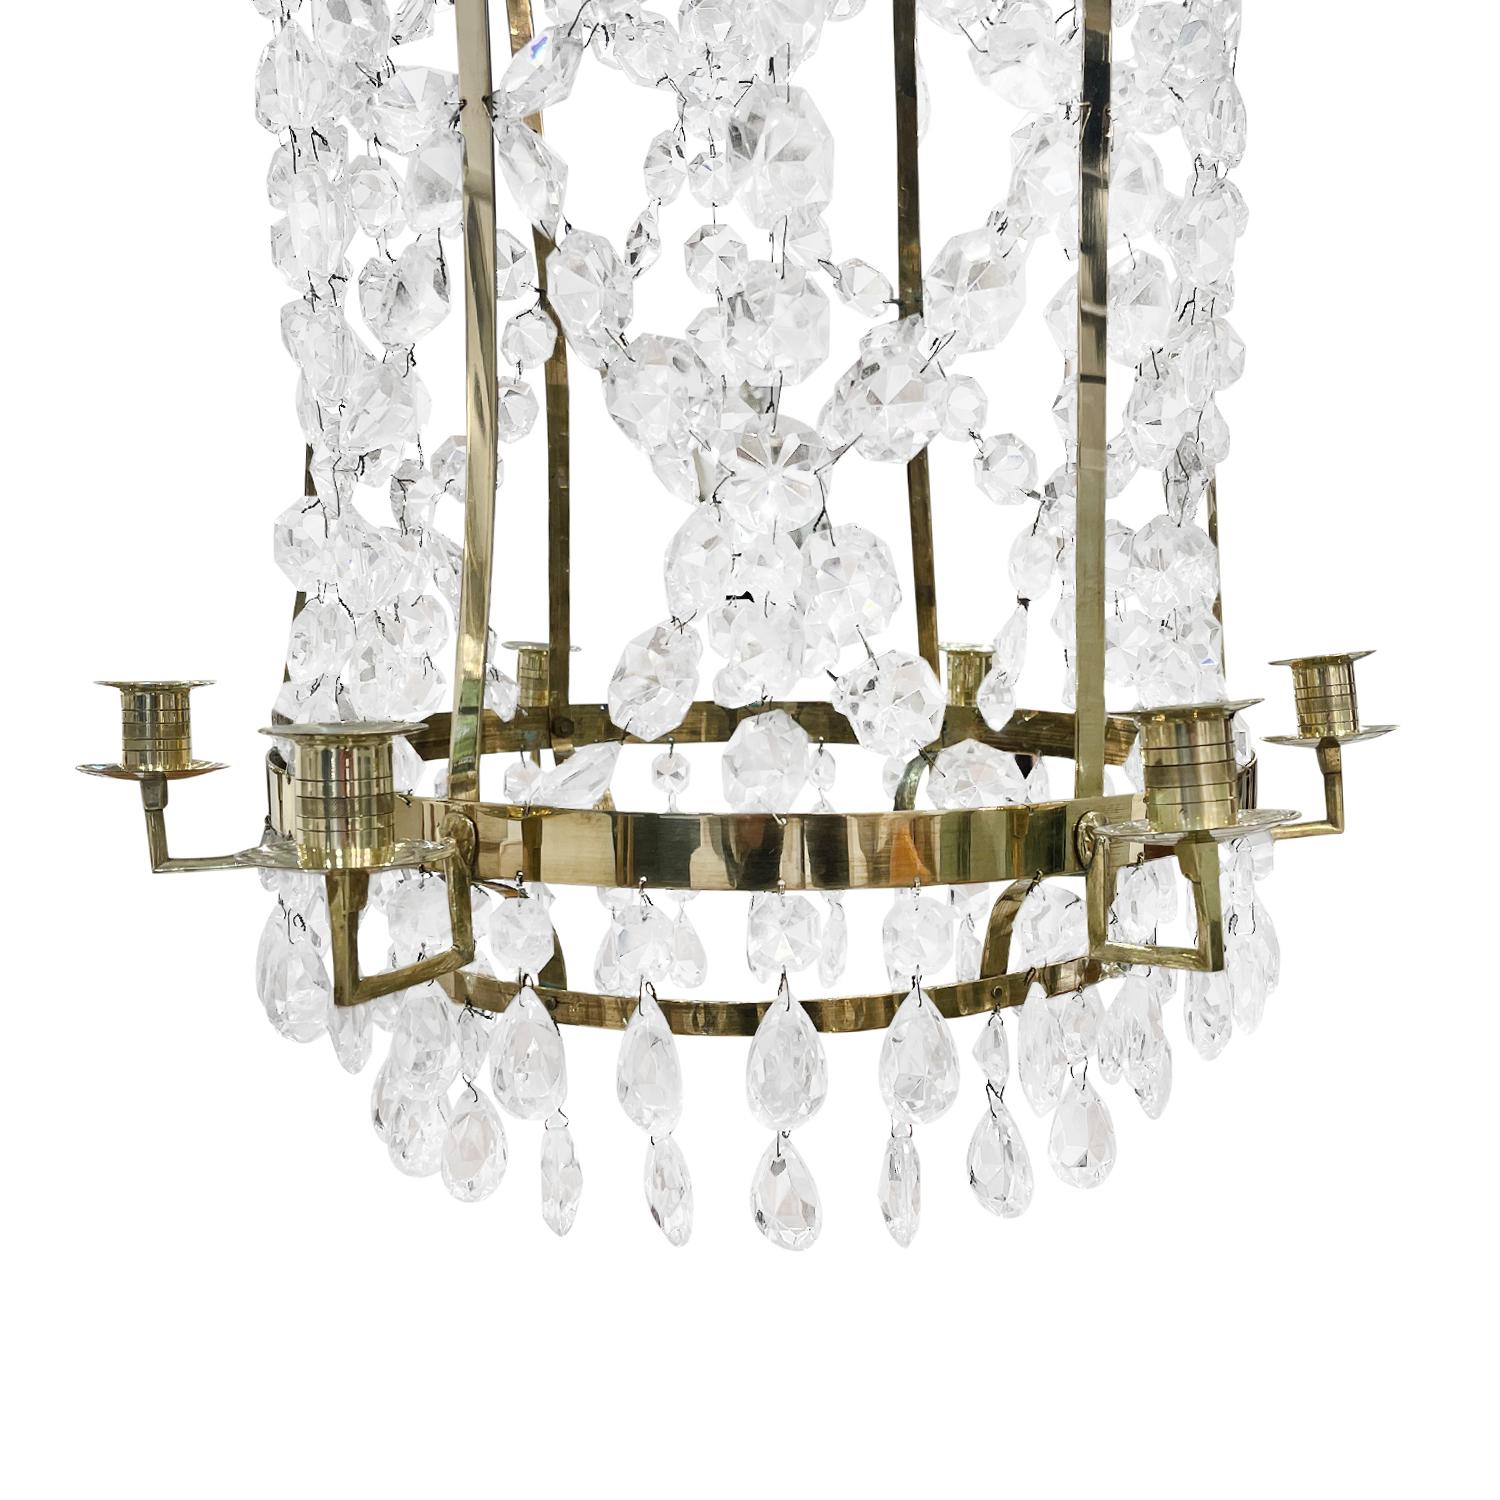 19th Century French Antique Empire Crystal Glass Chandelier, Parisian Candelabra For Sale 1